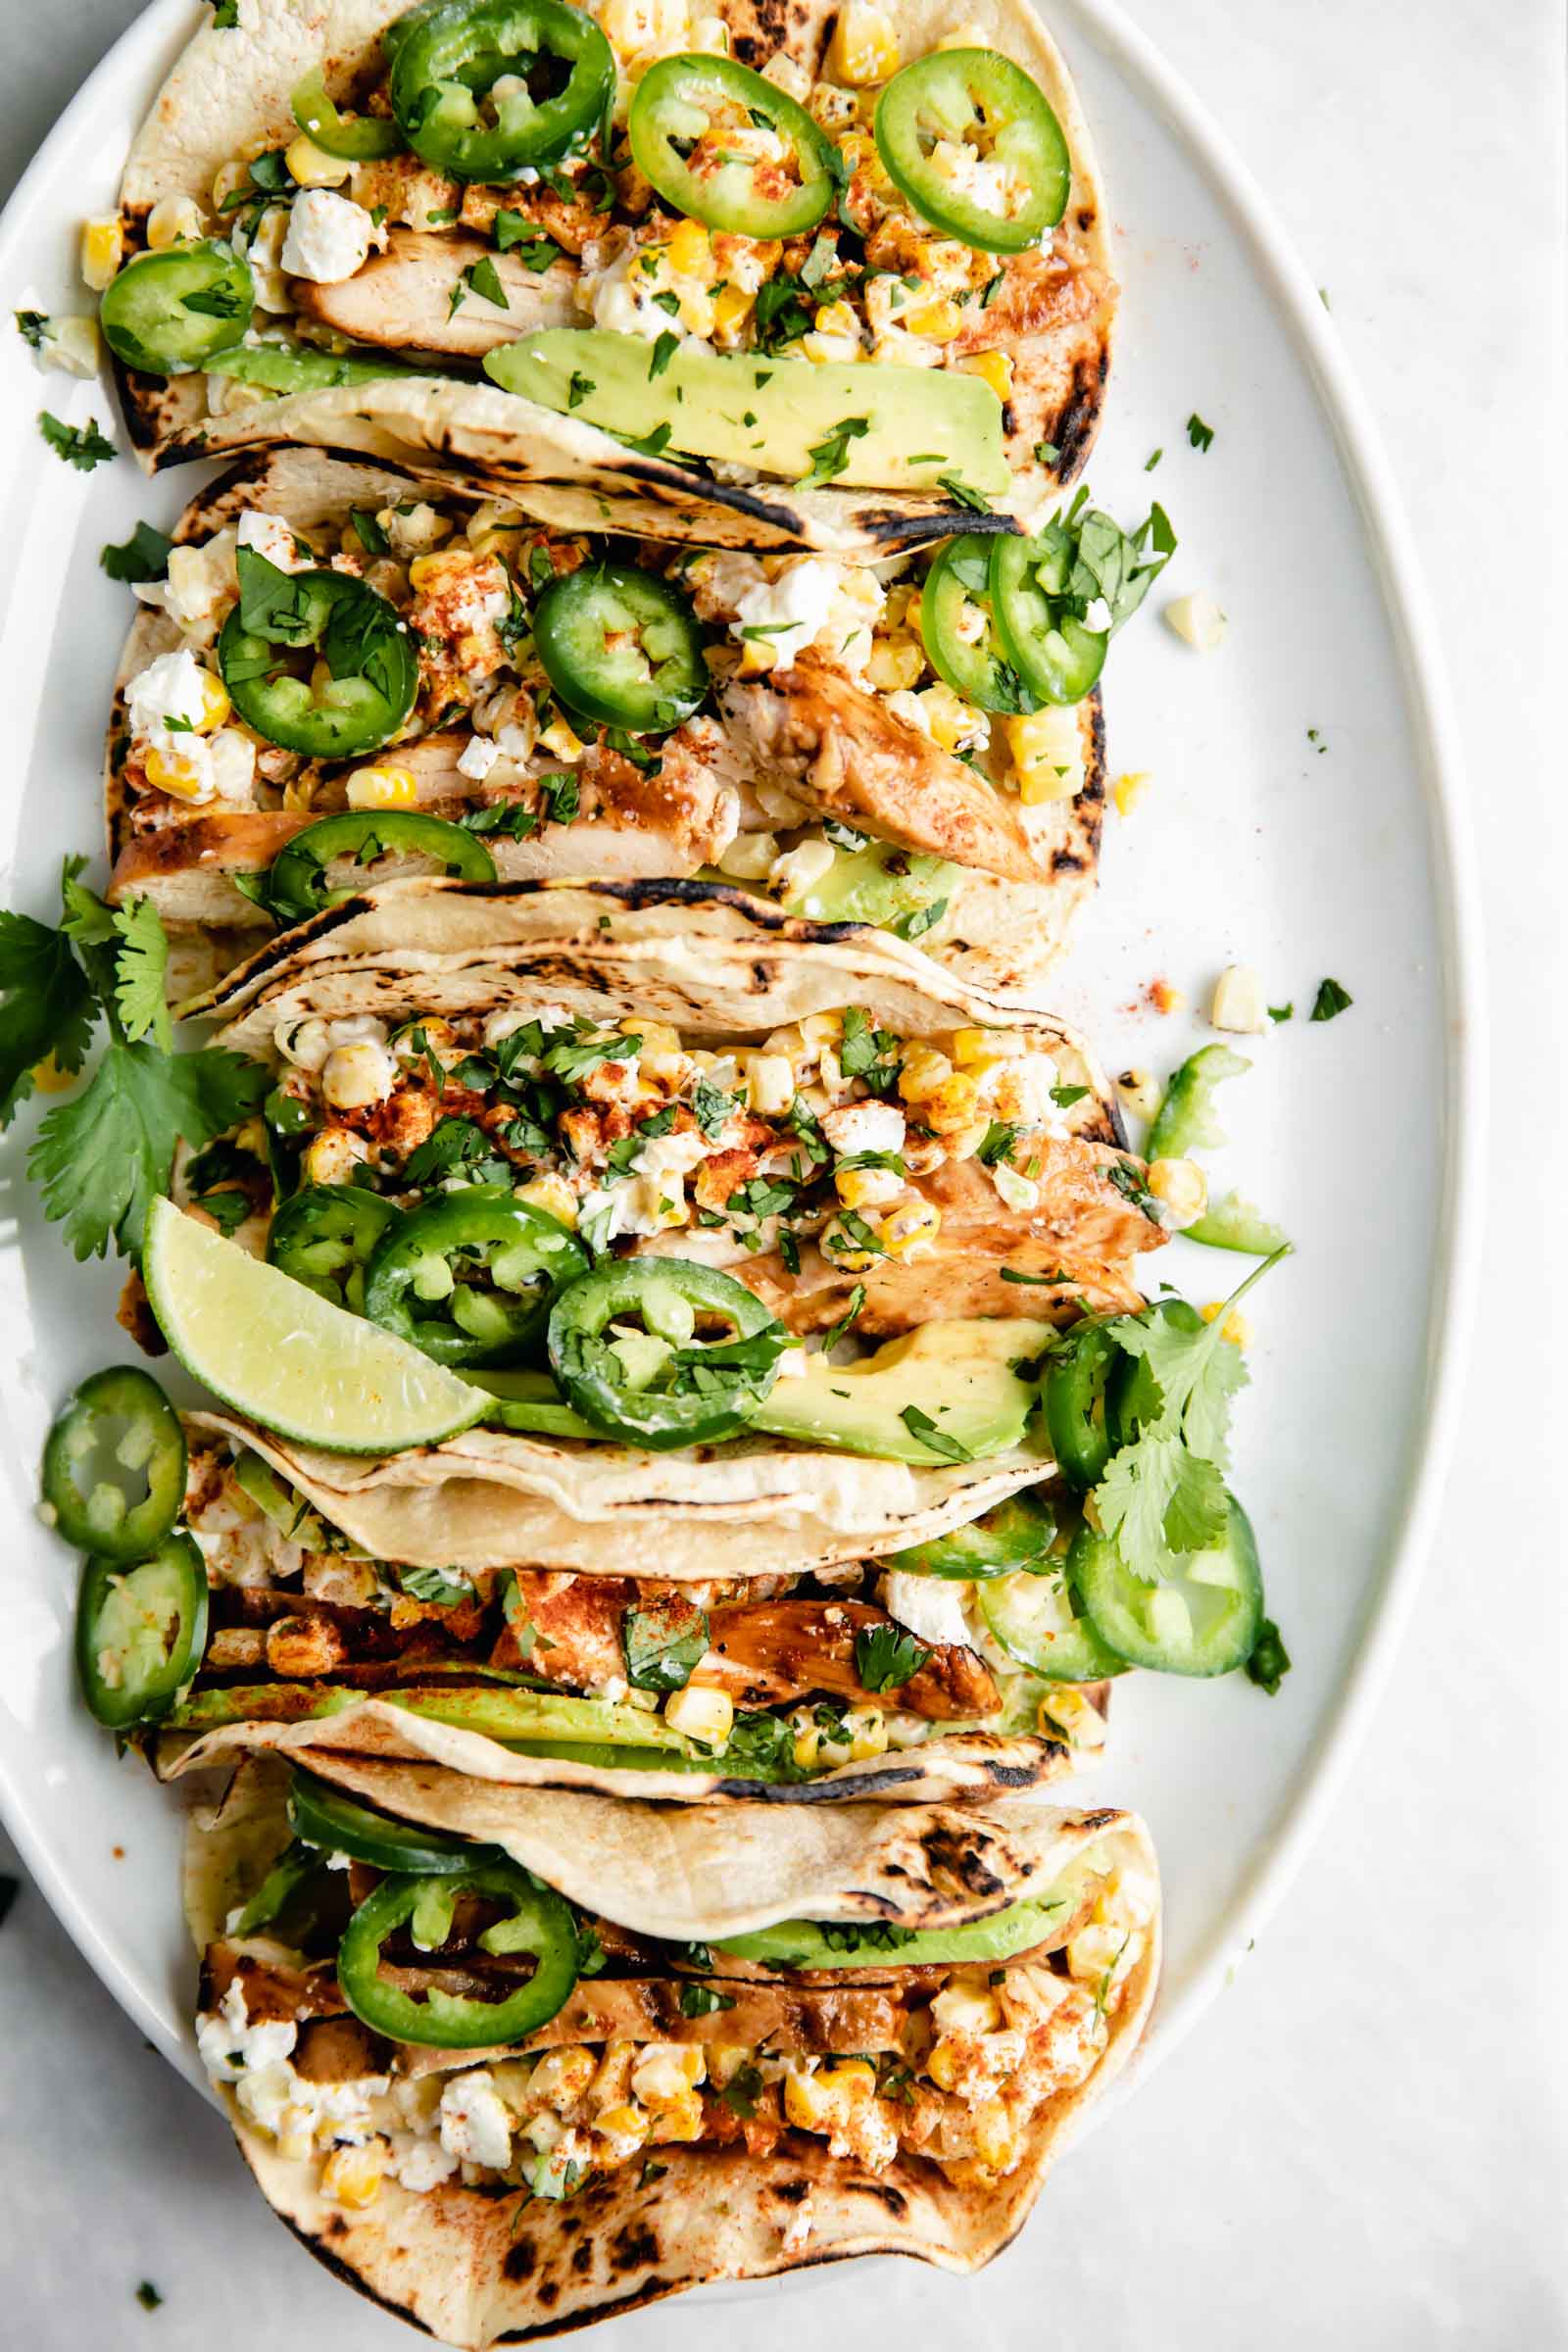 Kicking off Summer Taco Tuesdays with BBQ Chicken Mexican Street Corn tacos loaded with crema, cotija cheese, avocado, and fresh corn. Sign me up!